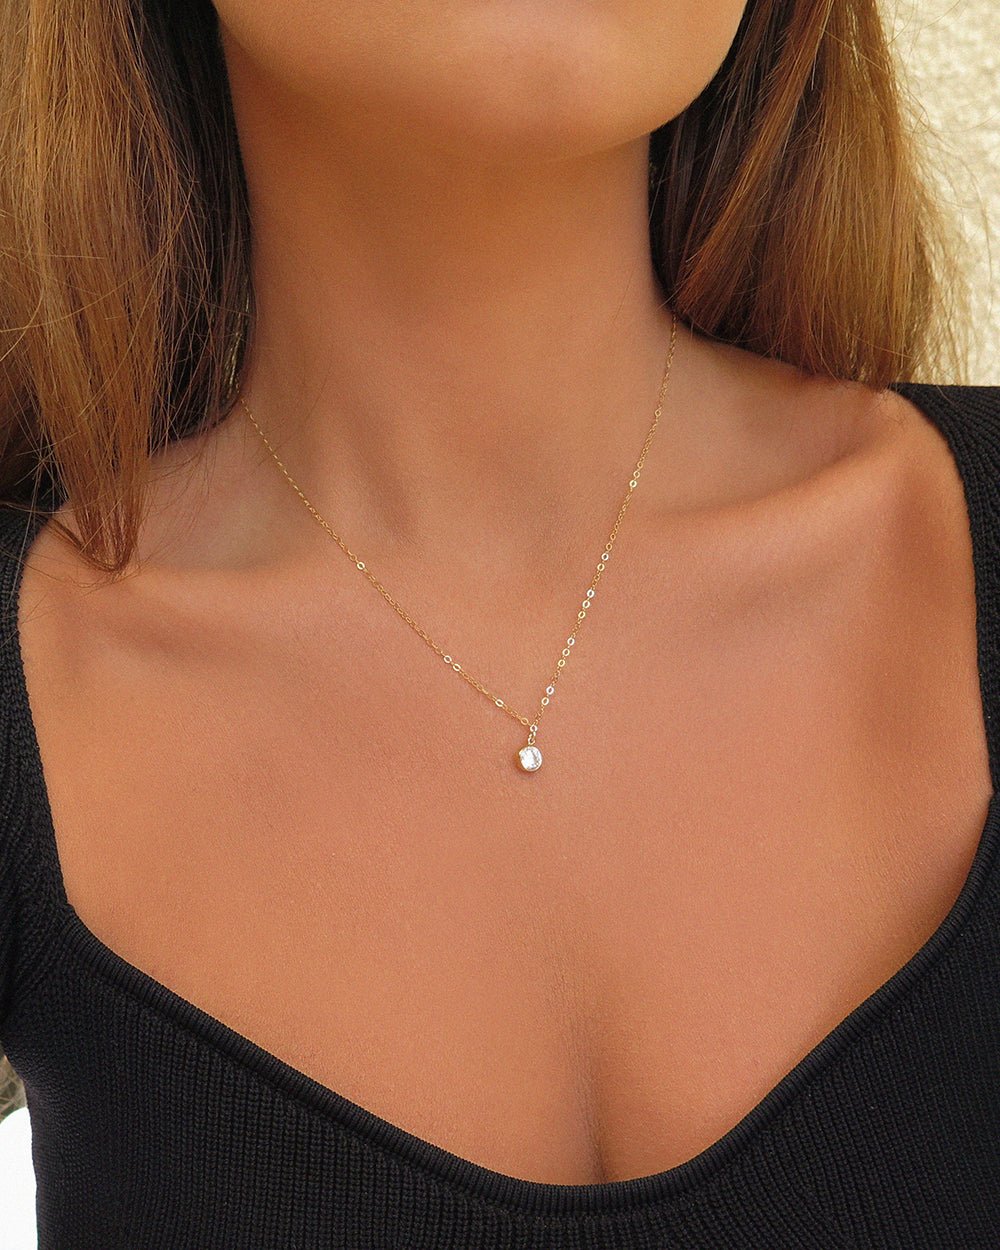 LARGE CZ NECKLACE- 14k Yellow Gold - The Littl - Deluxe Chain - 37cm (choker) Necklaces